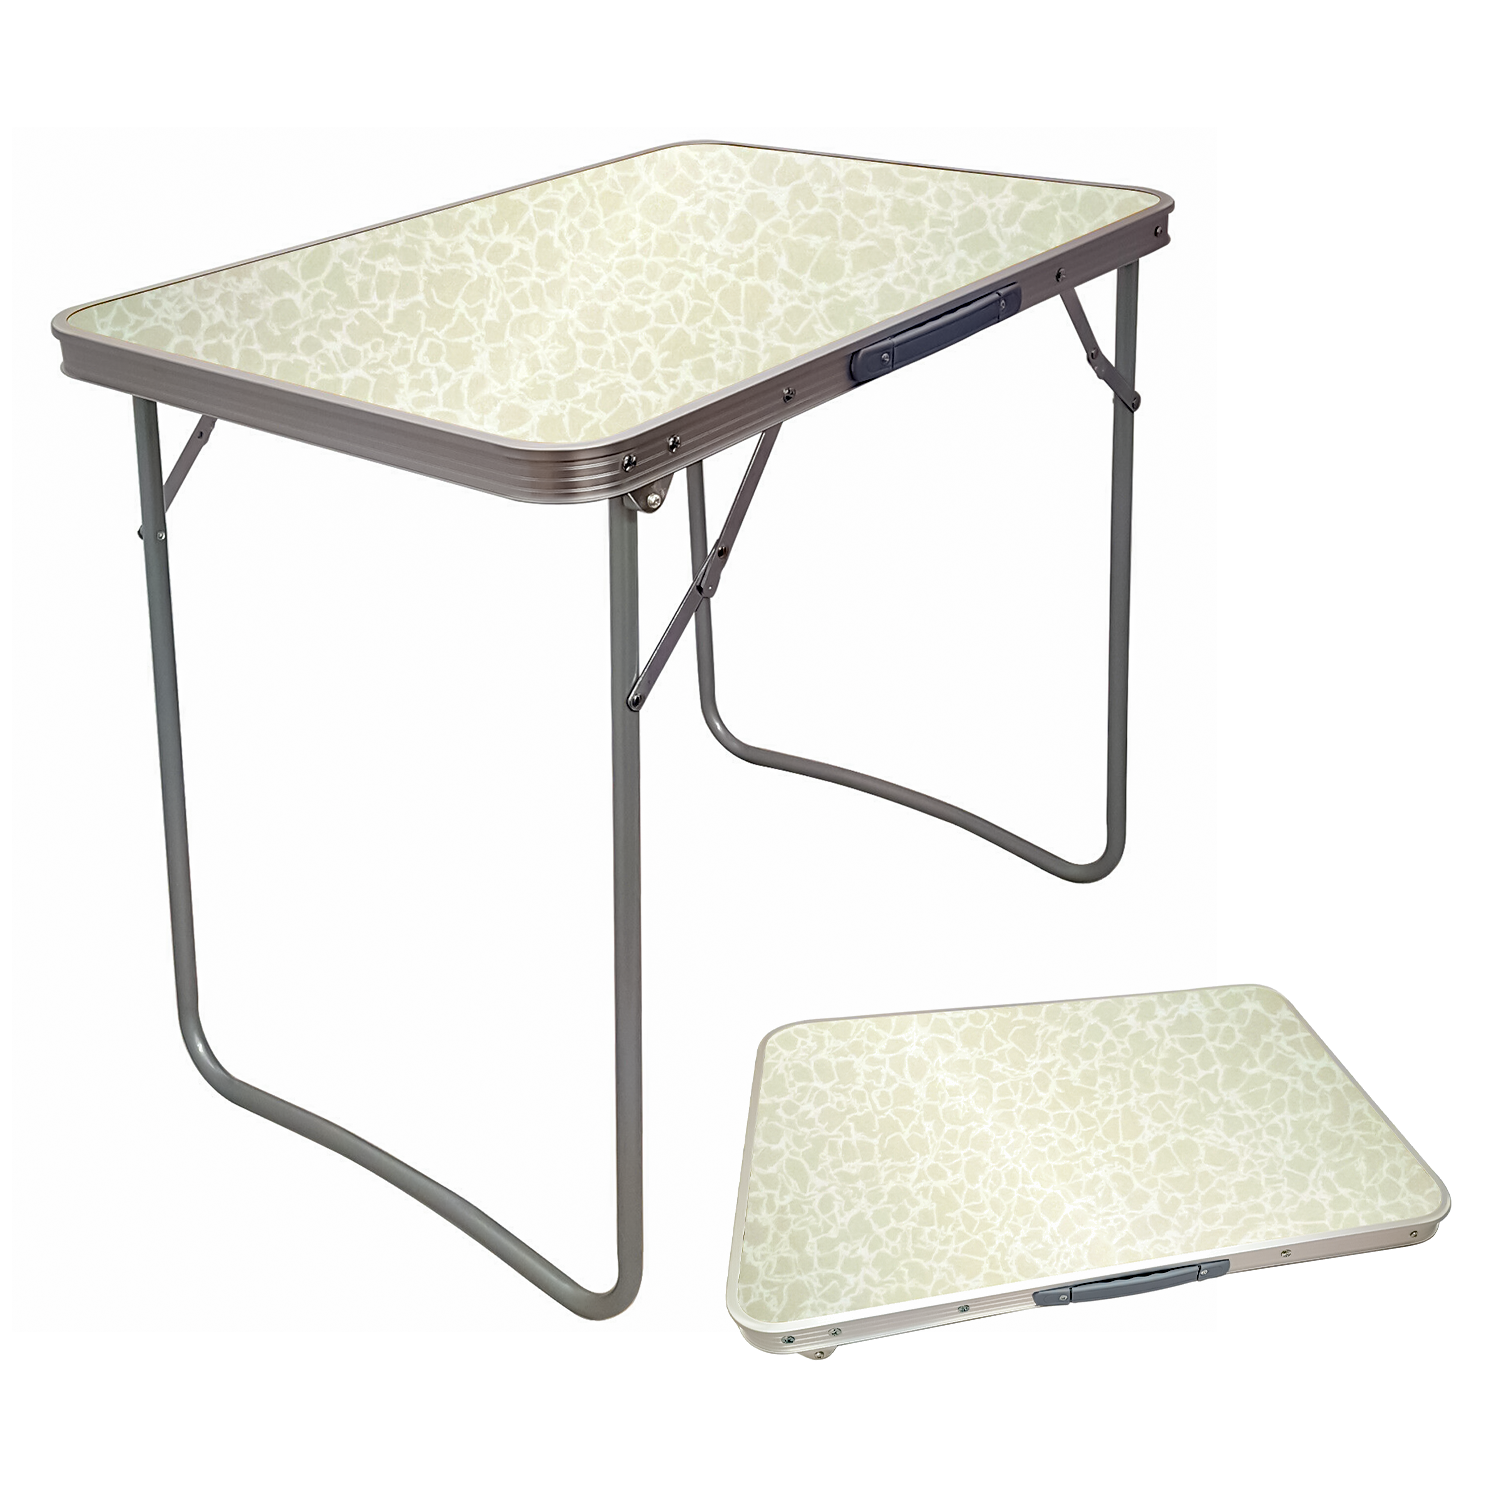 Buy white 2.3ft Picnic Camping Folding Table